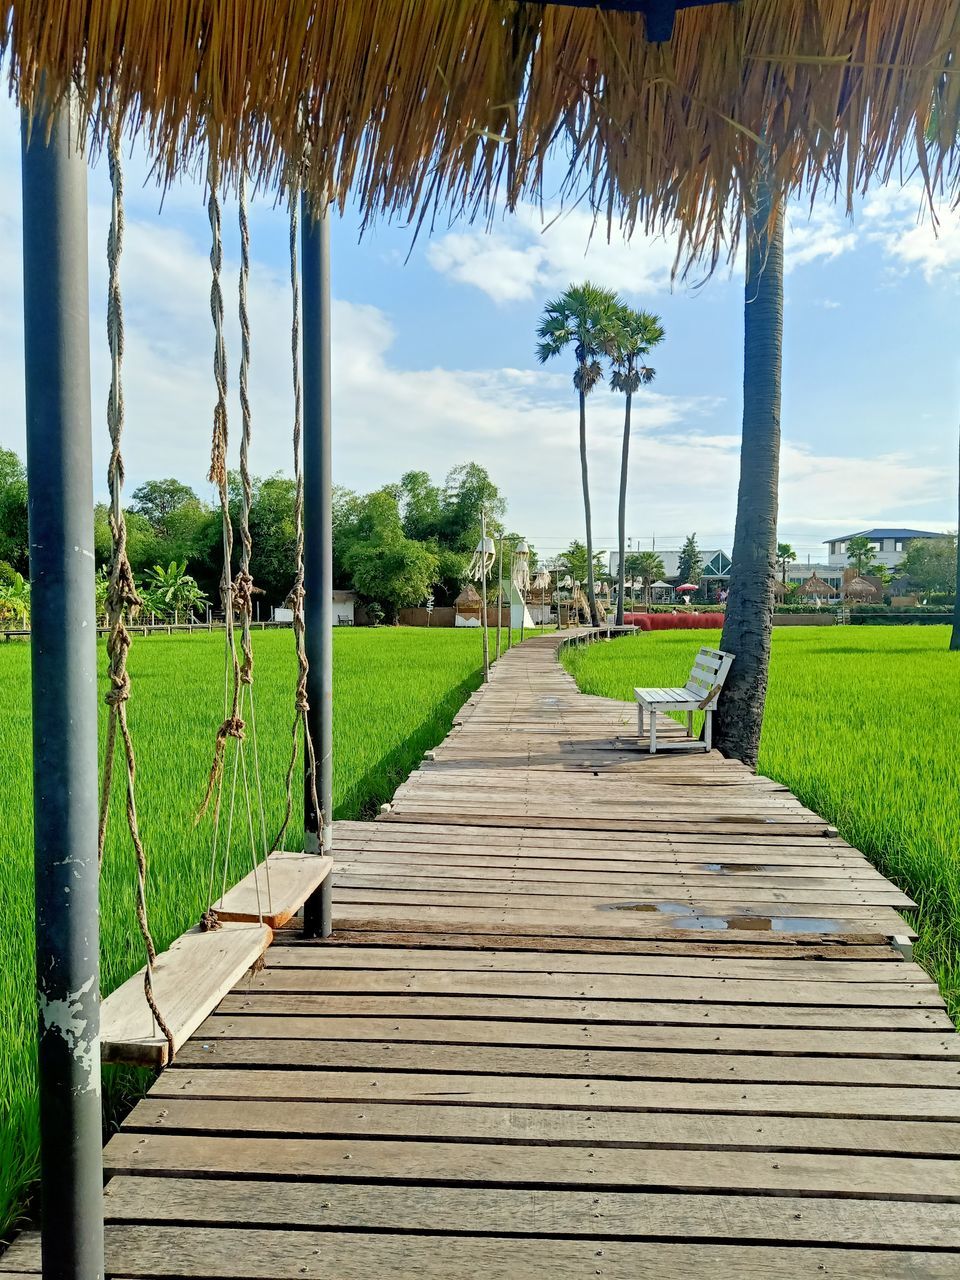 tropical climate, walkway, plant, palm tree, tree, nature, sky, beauty in nature, tranquility, land, grass, scenics - nature, tranquil scene, wood, footpath, architecture, the way forward, landscape, water, no people, green, travel destinations, idyllic, vacation, trip, estate, holiday, environment, day, summer, boardwalk, outdoors, built structure, beach, cloud, sunlight, tropical tree, travel, sea, relaxation, diminishing perspective, tourist resort, rural scene, thatched roof, non-urban scene, gazebo, horizon, resort, tourism, roof, coconut palm tree, field, blue, landscaped, seat